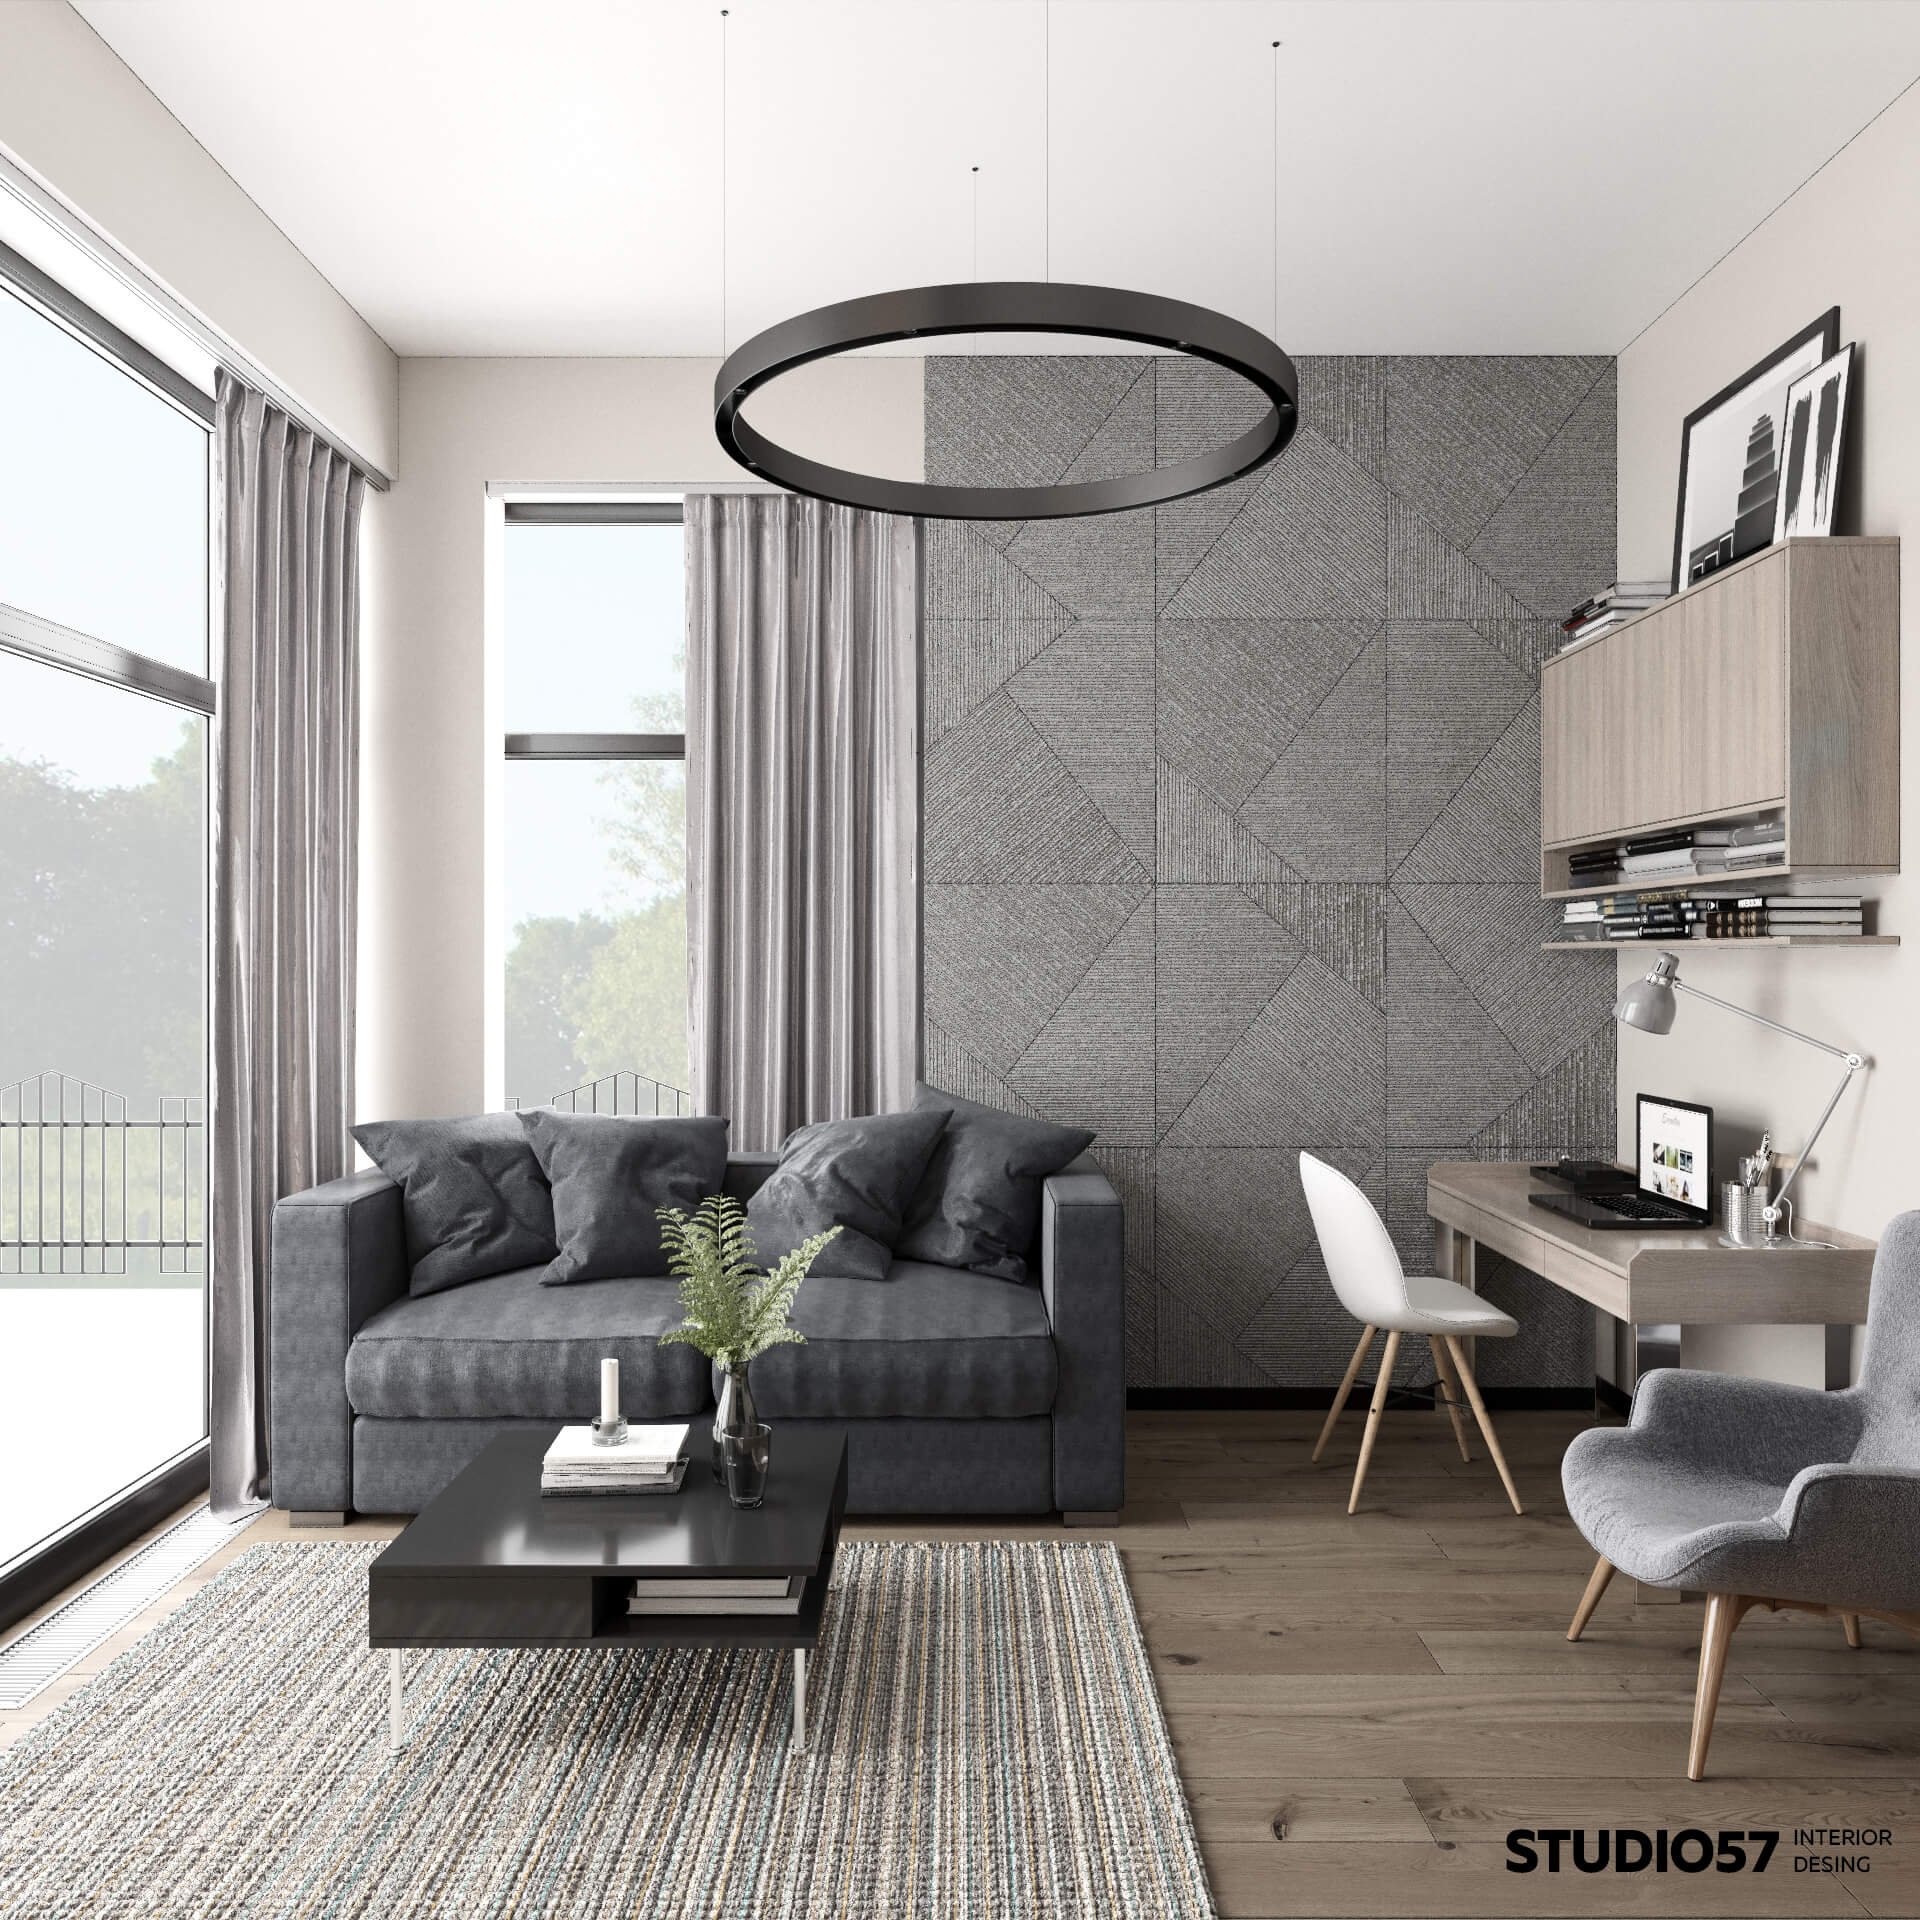 Room for a teenager in gray tones